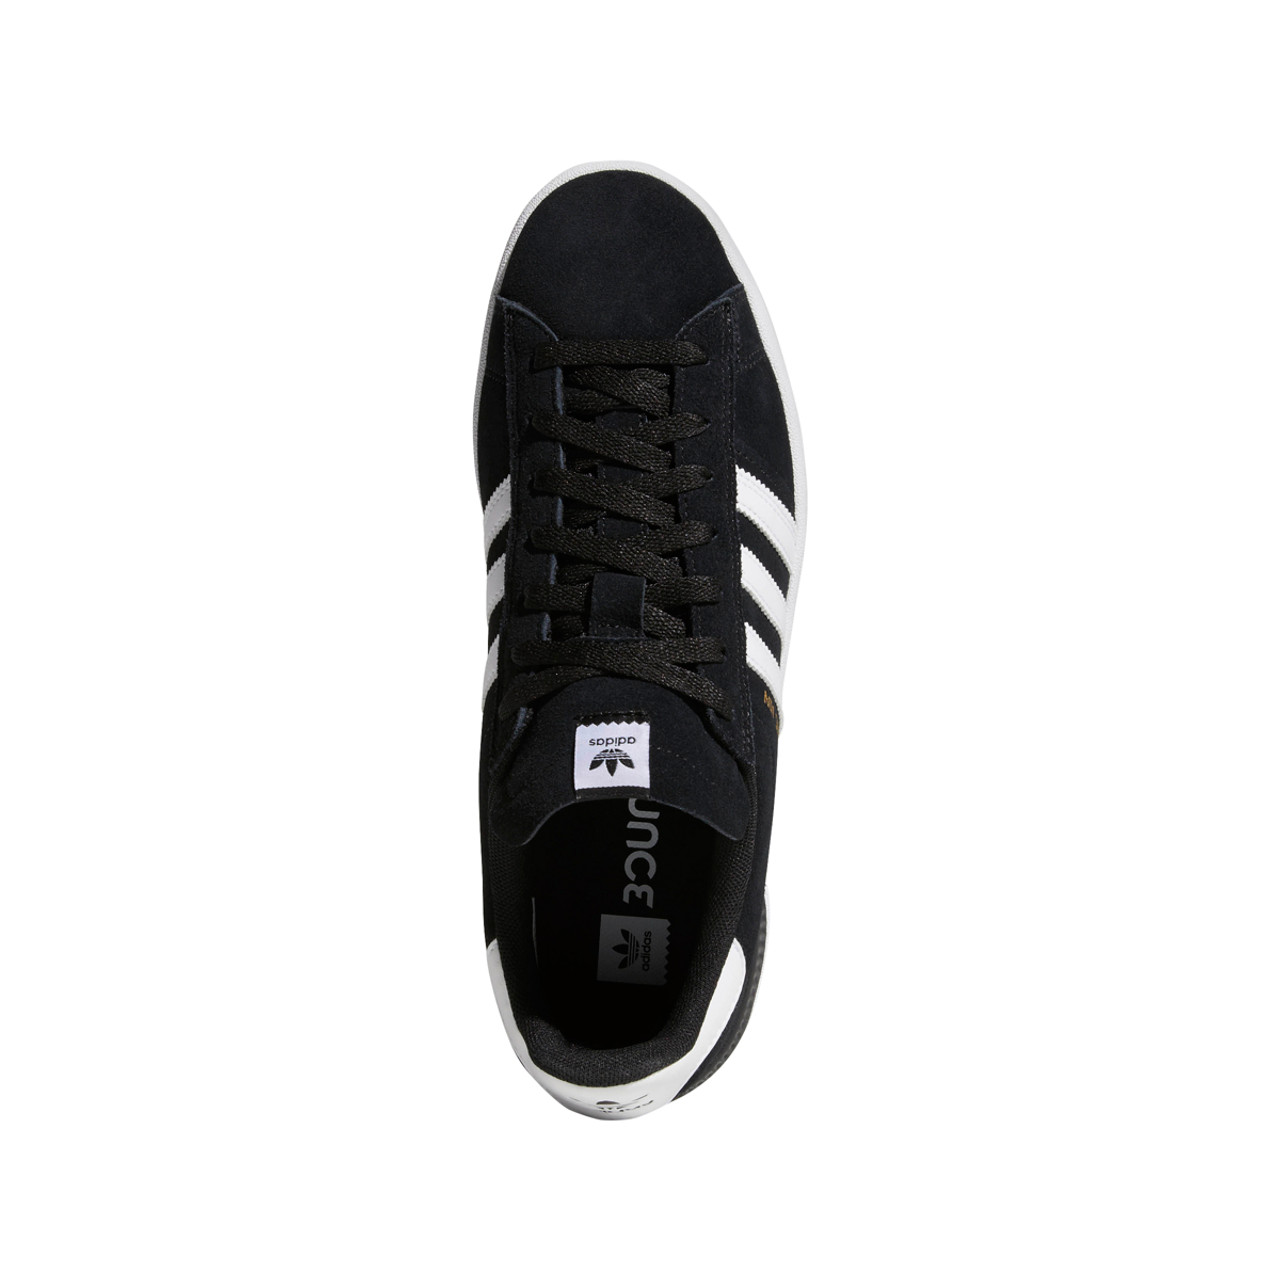 Adidas Campus ADV Cup Sole Shoes Black White